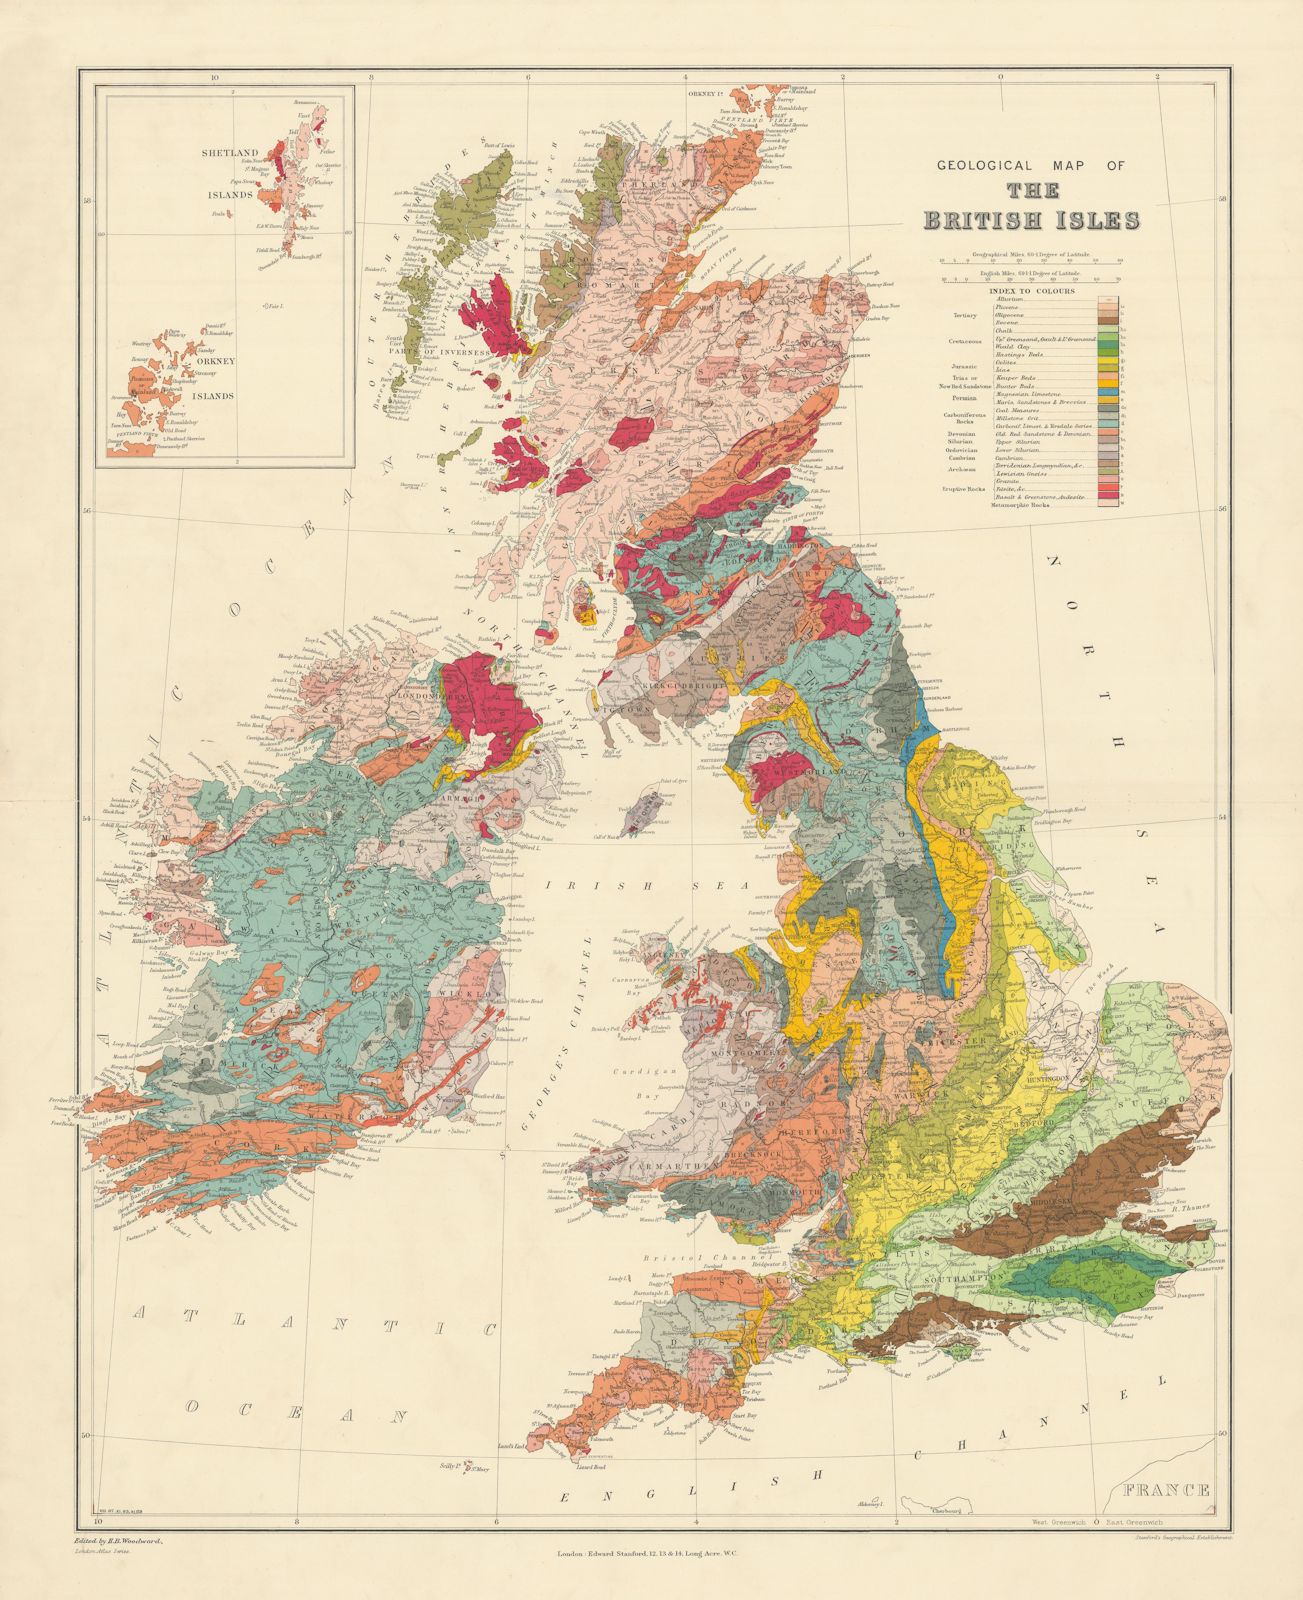 Geological Map of the British Isles. Large 66x53cm. STANFORD 1904 old